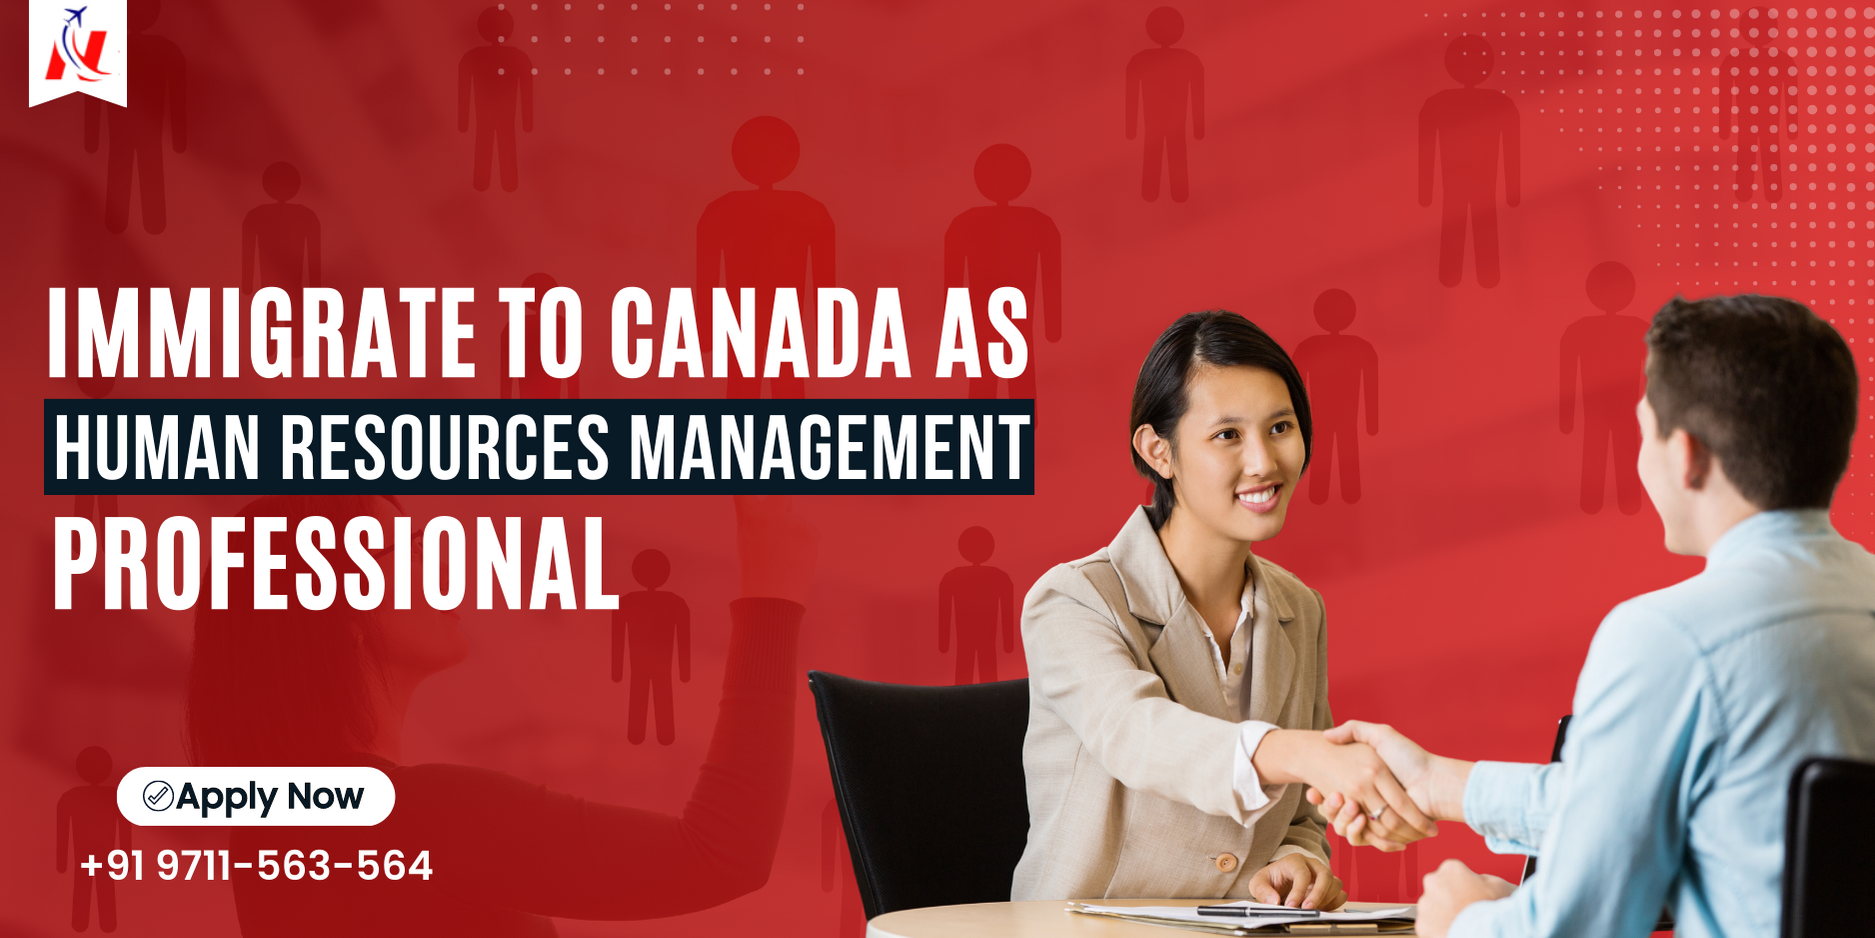 Immigration to Canada as a Human Resources Management Professional